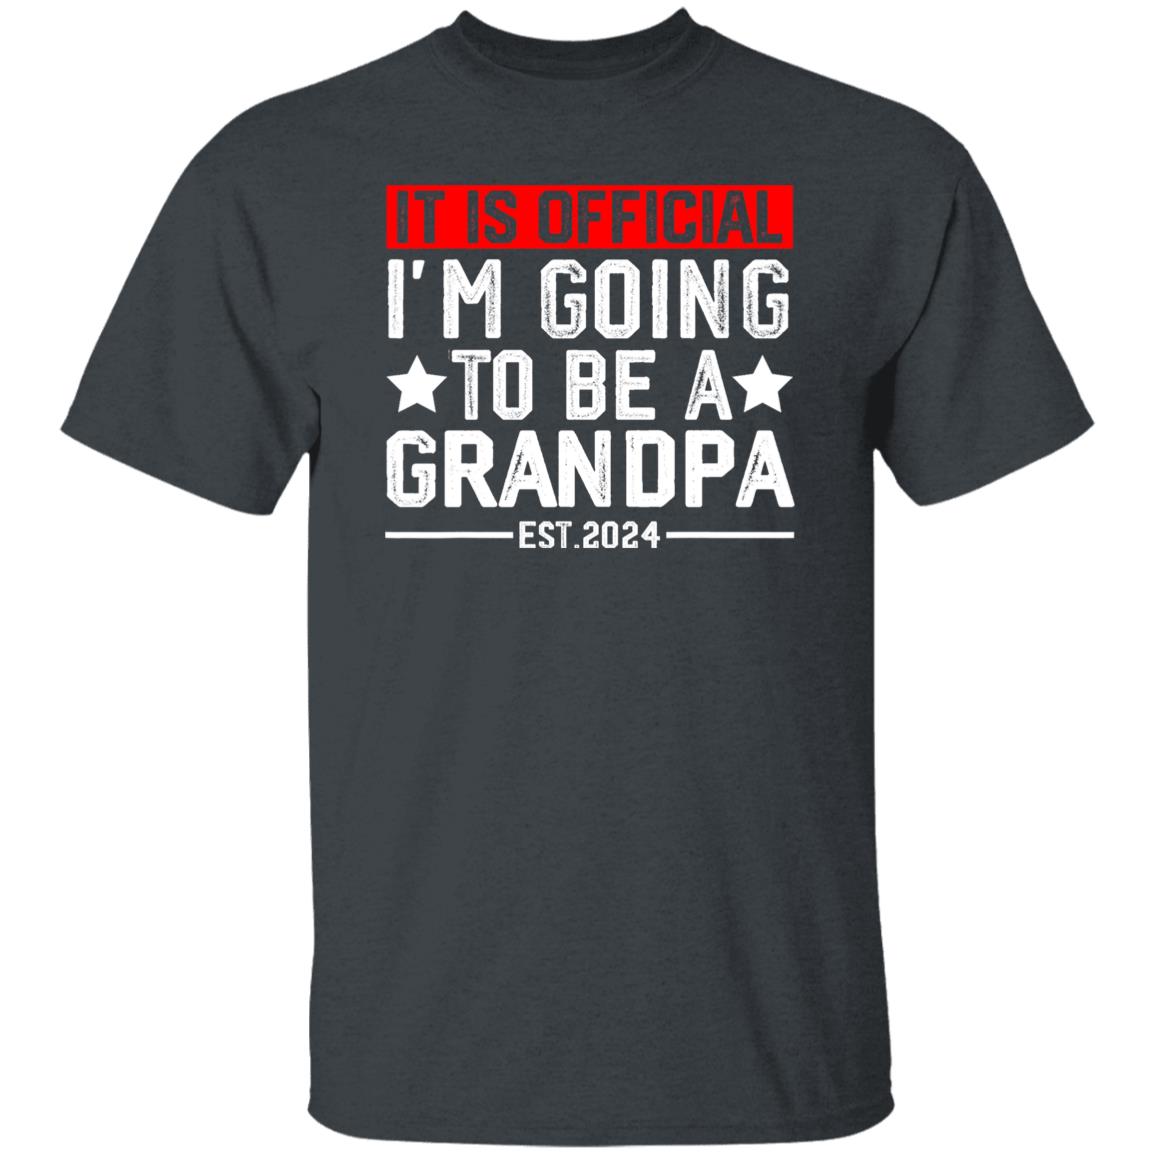 Customized It Is Official I'm Going to Be a Grandpa Gift Shirt